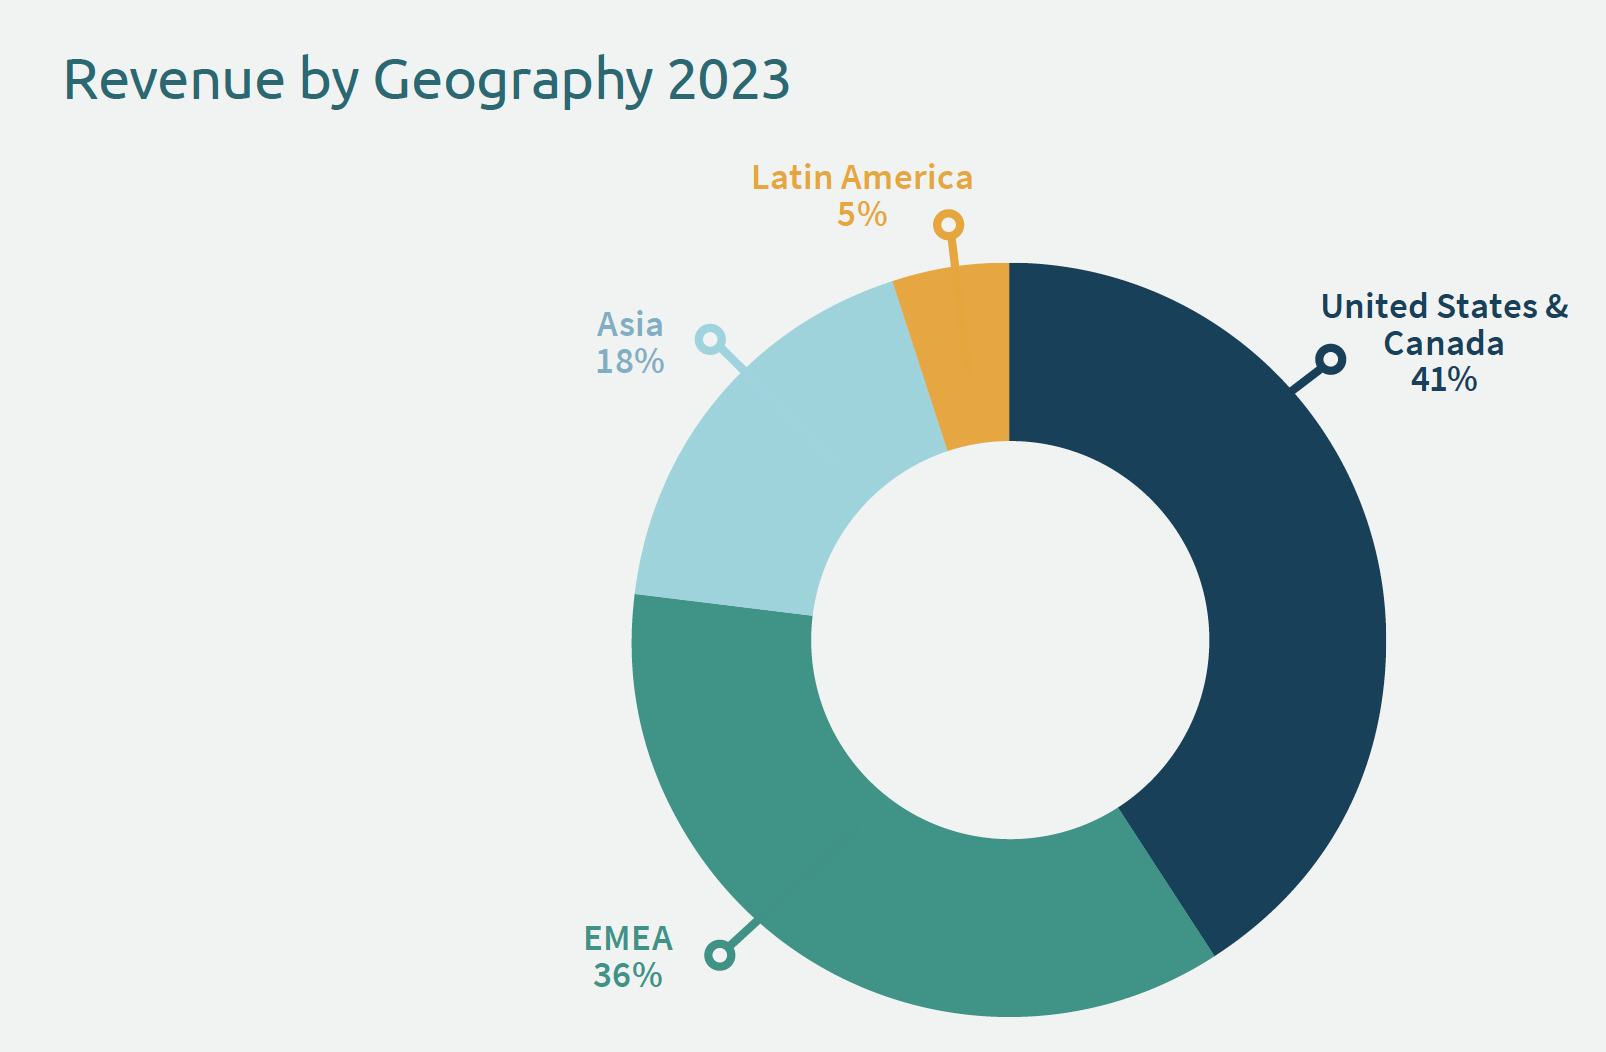 Revenue by Geography 2023